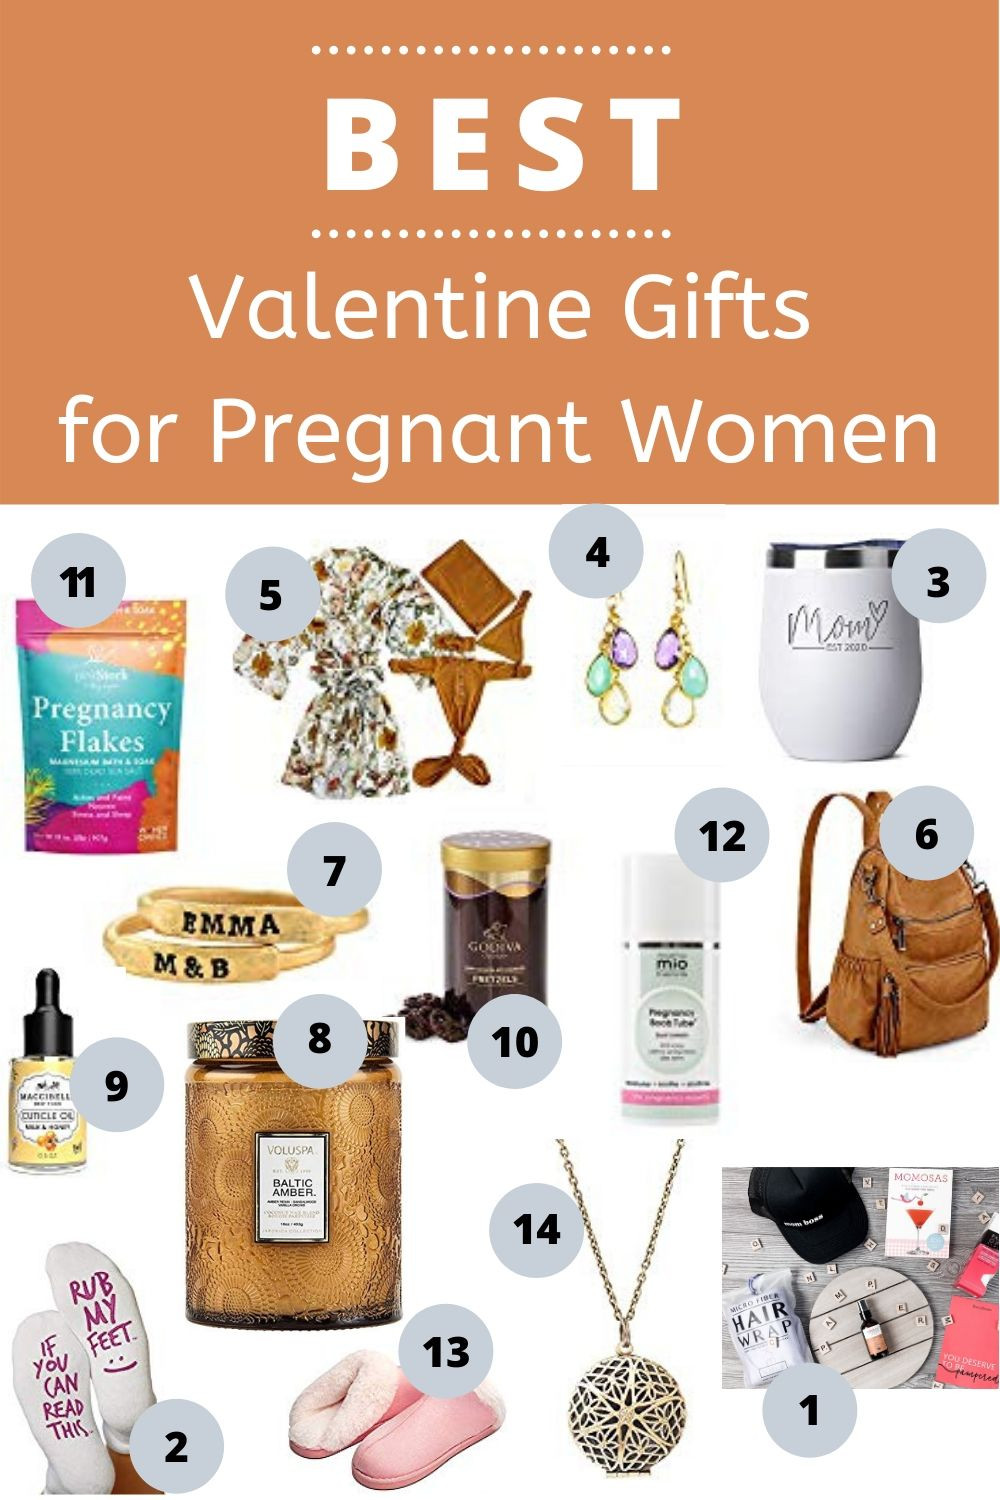 Personal Valentines Gift Ideas
 Best Valentine Gift Ideas for Pregnant Women VBAC Mama